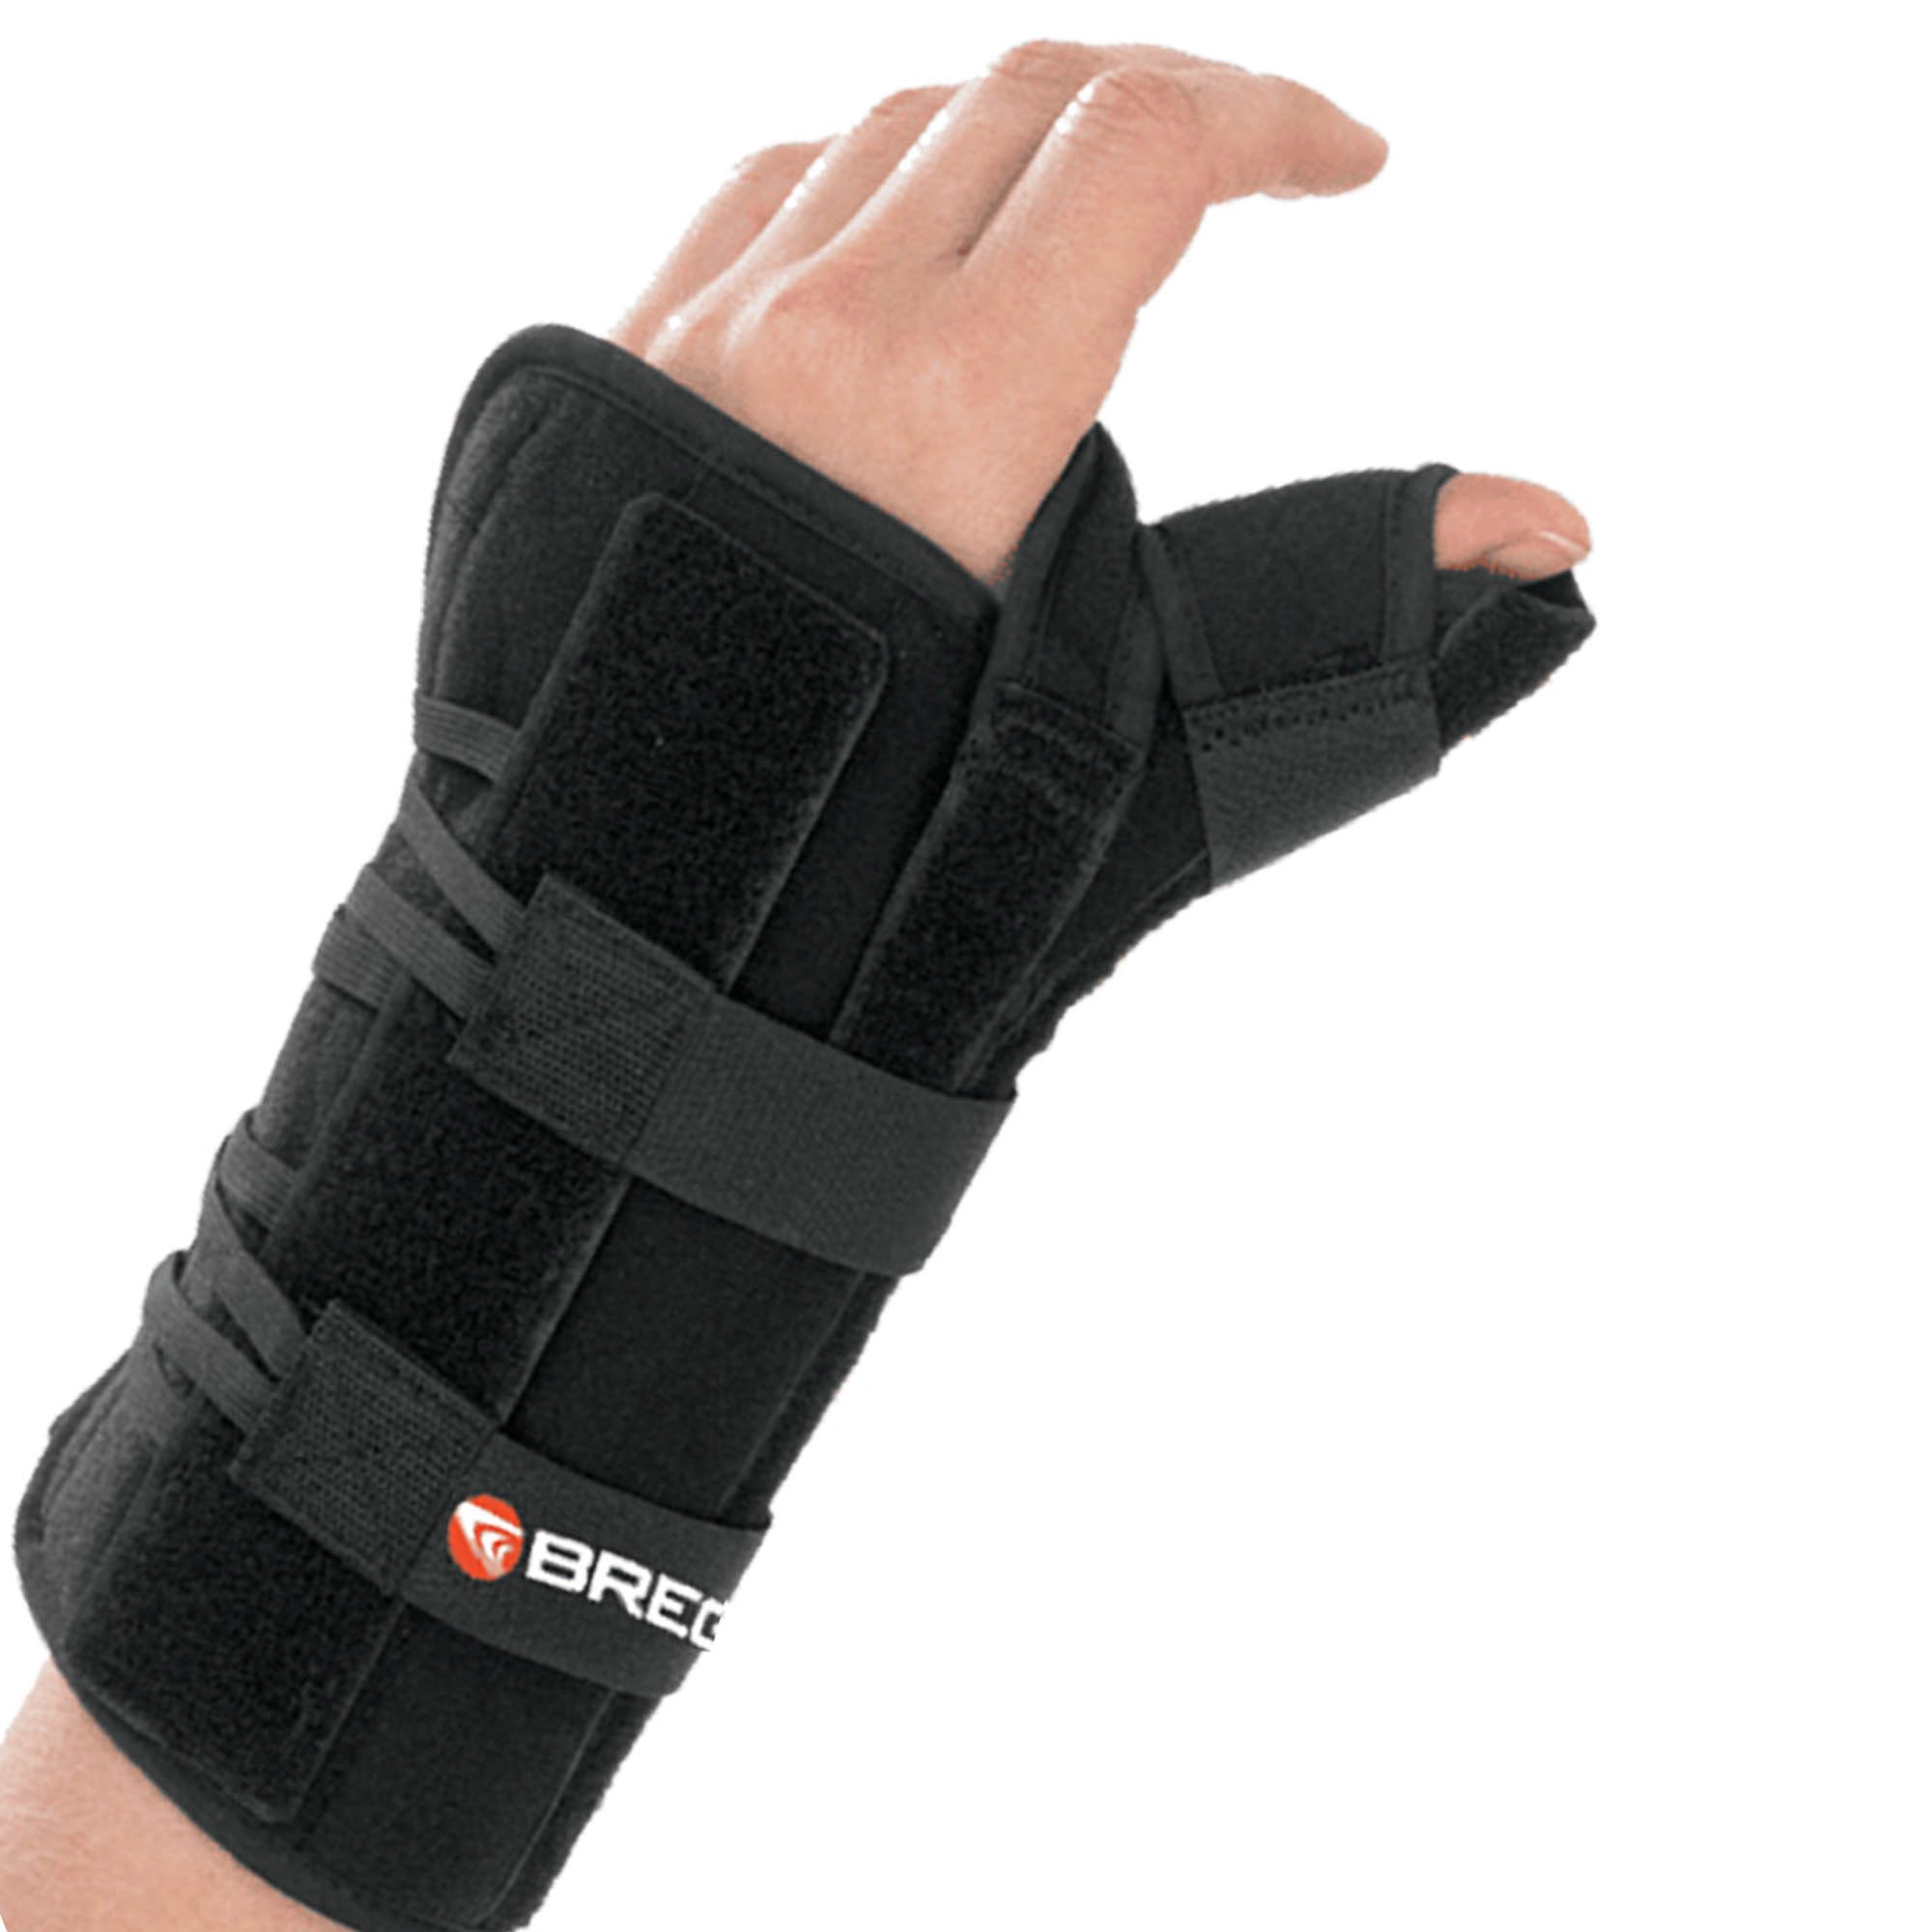 Wrist Brace with Thumb Spica Apollo Universal Aluminum / Foam Left Hand Black One Size Fits Most